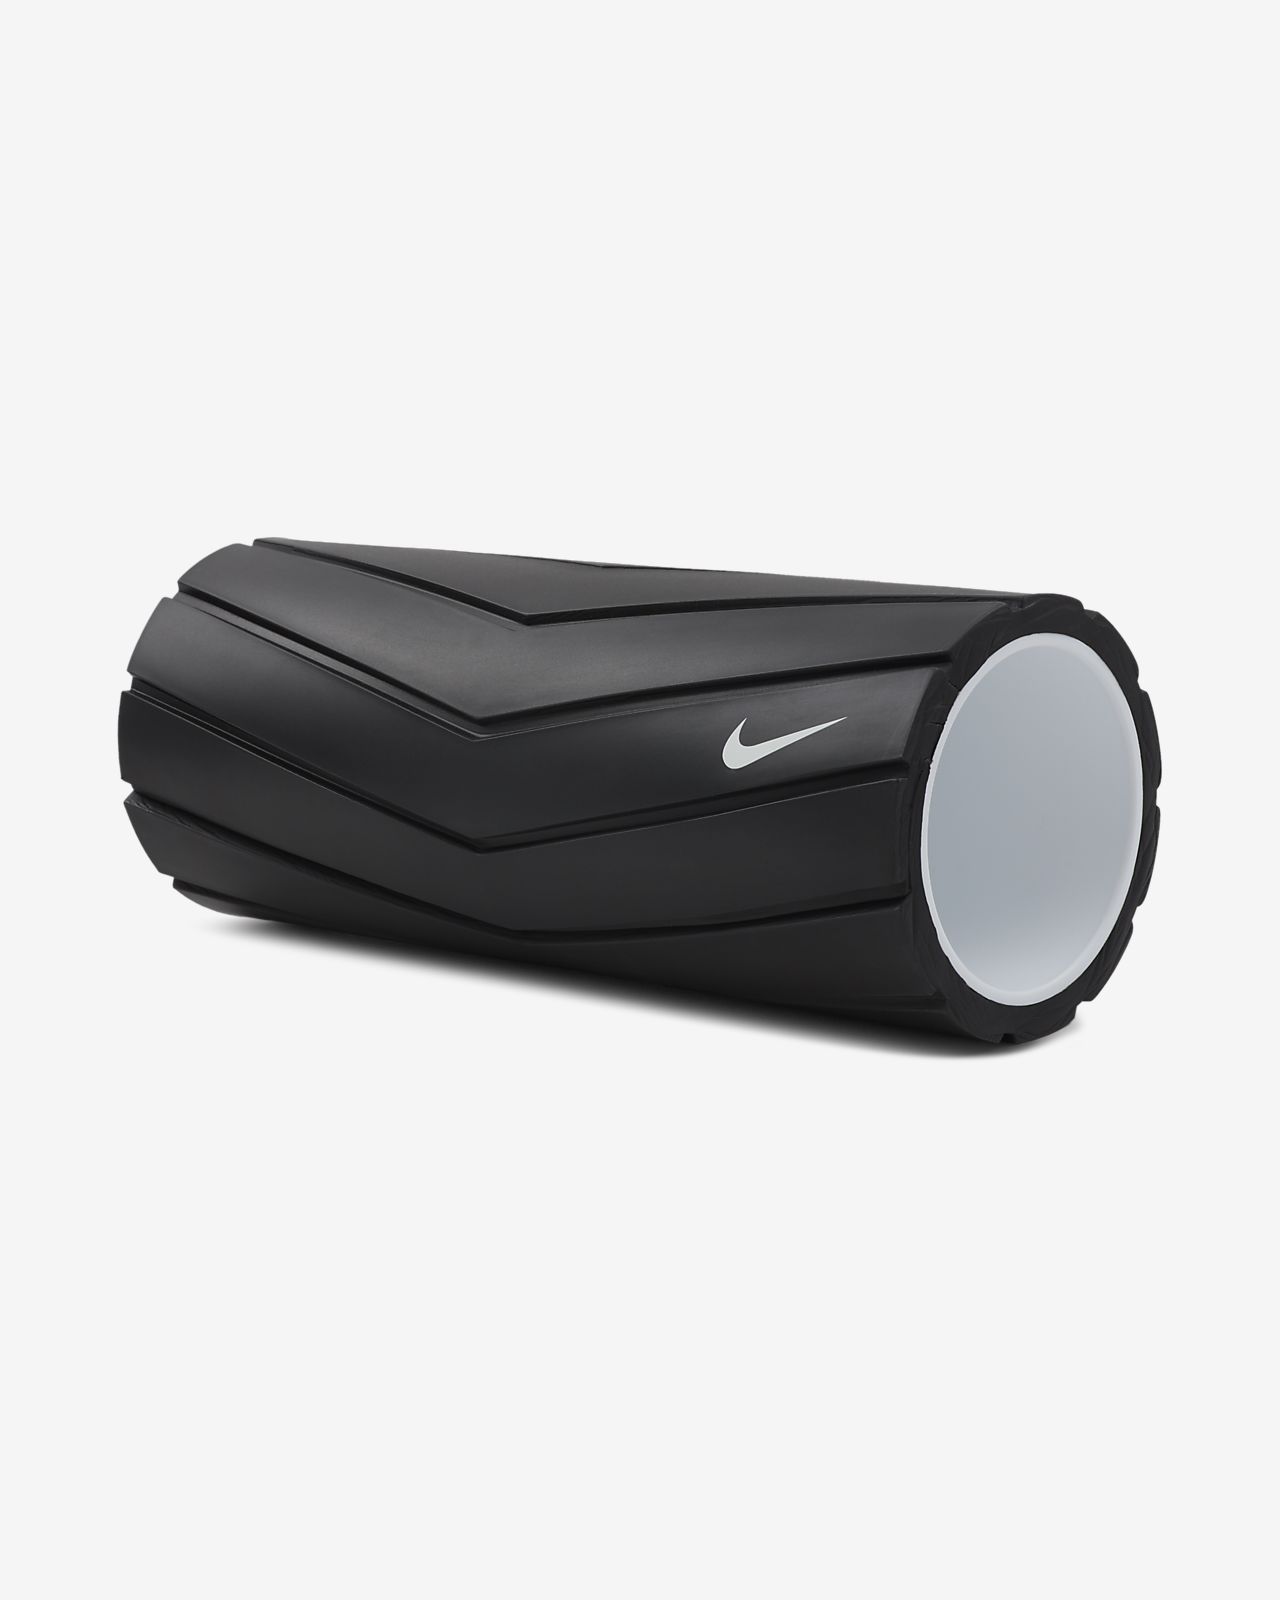 nike recovery roller